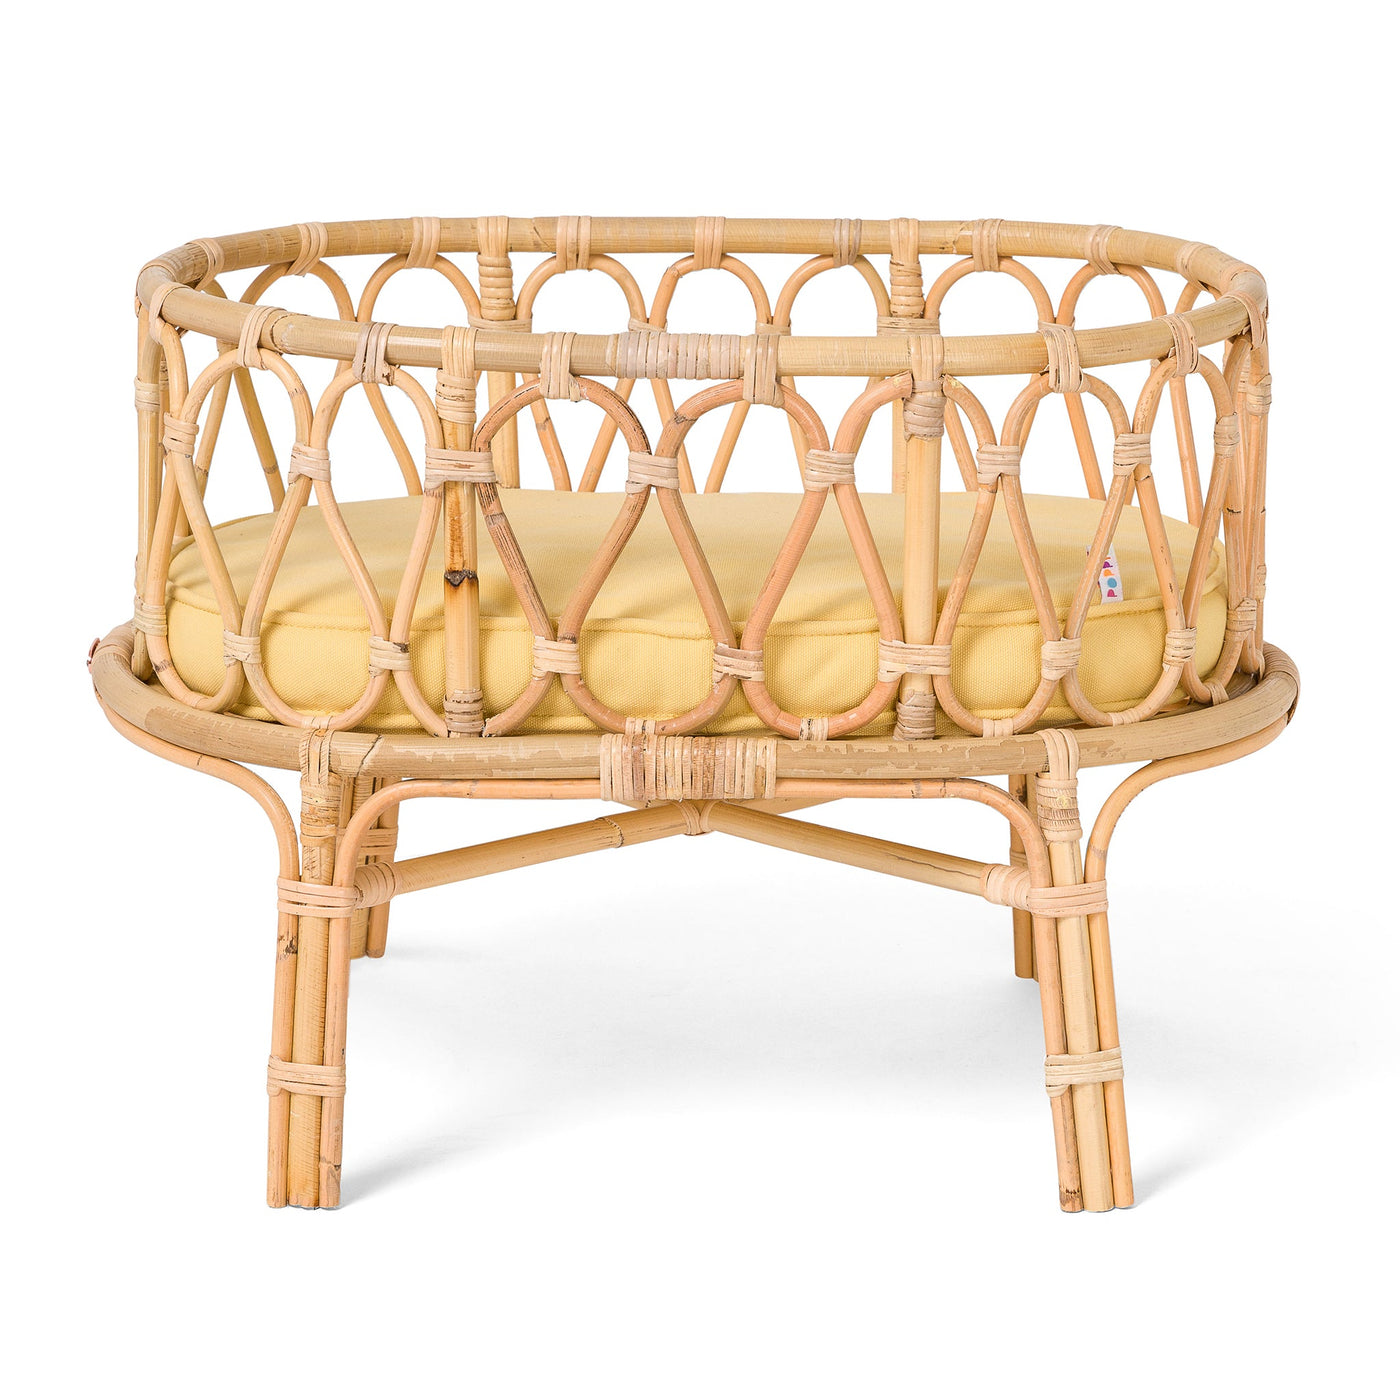 Poppie Crib Classic Collection, Assorted Colors